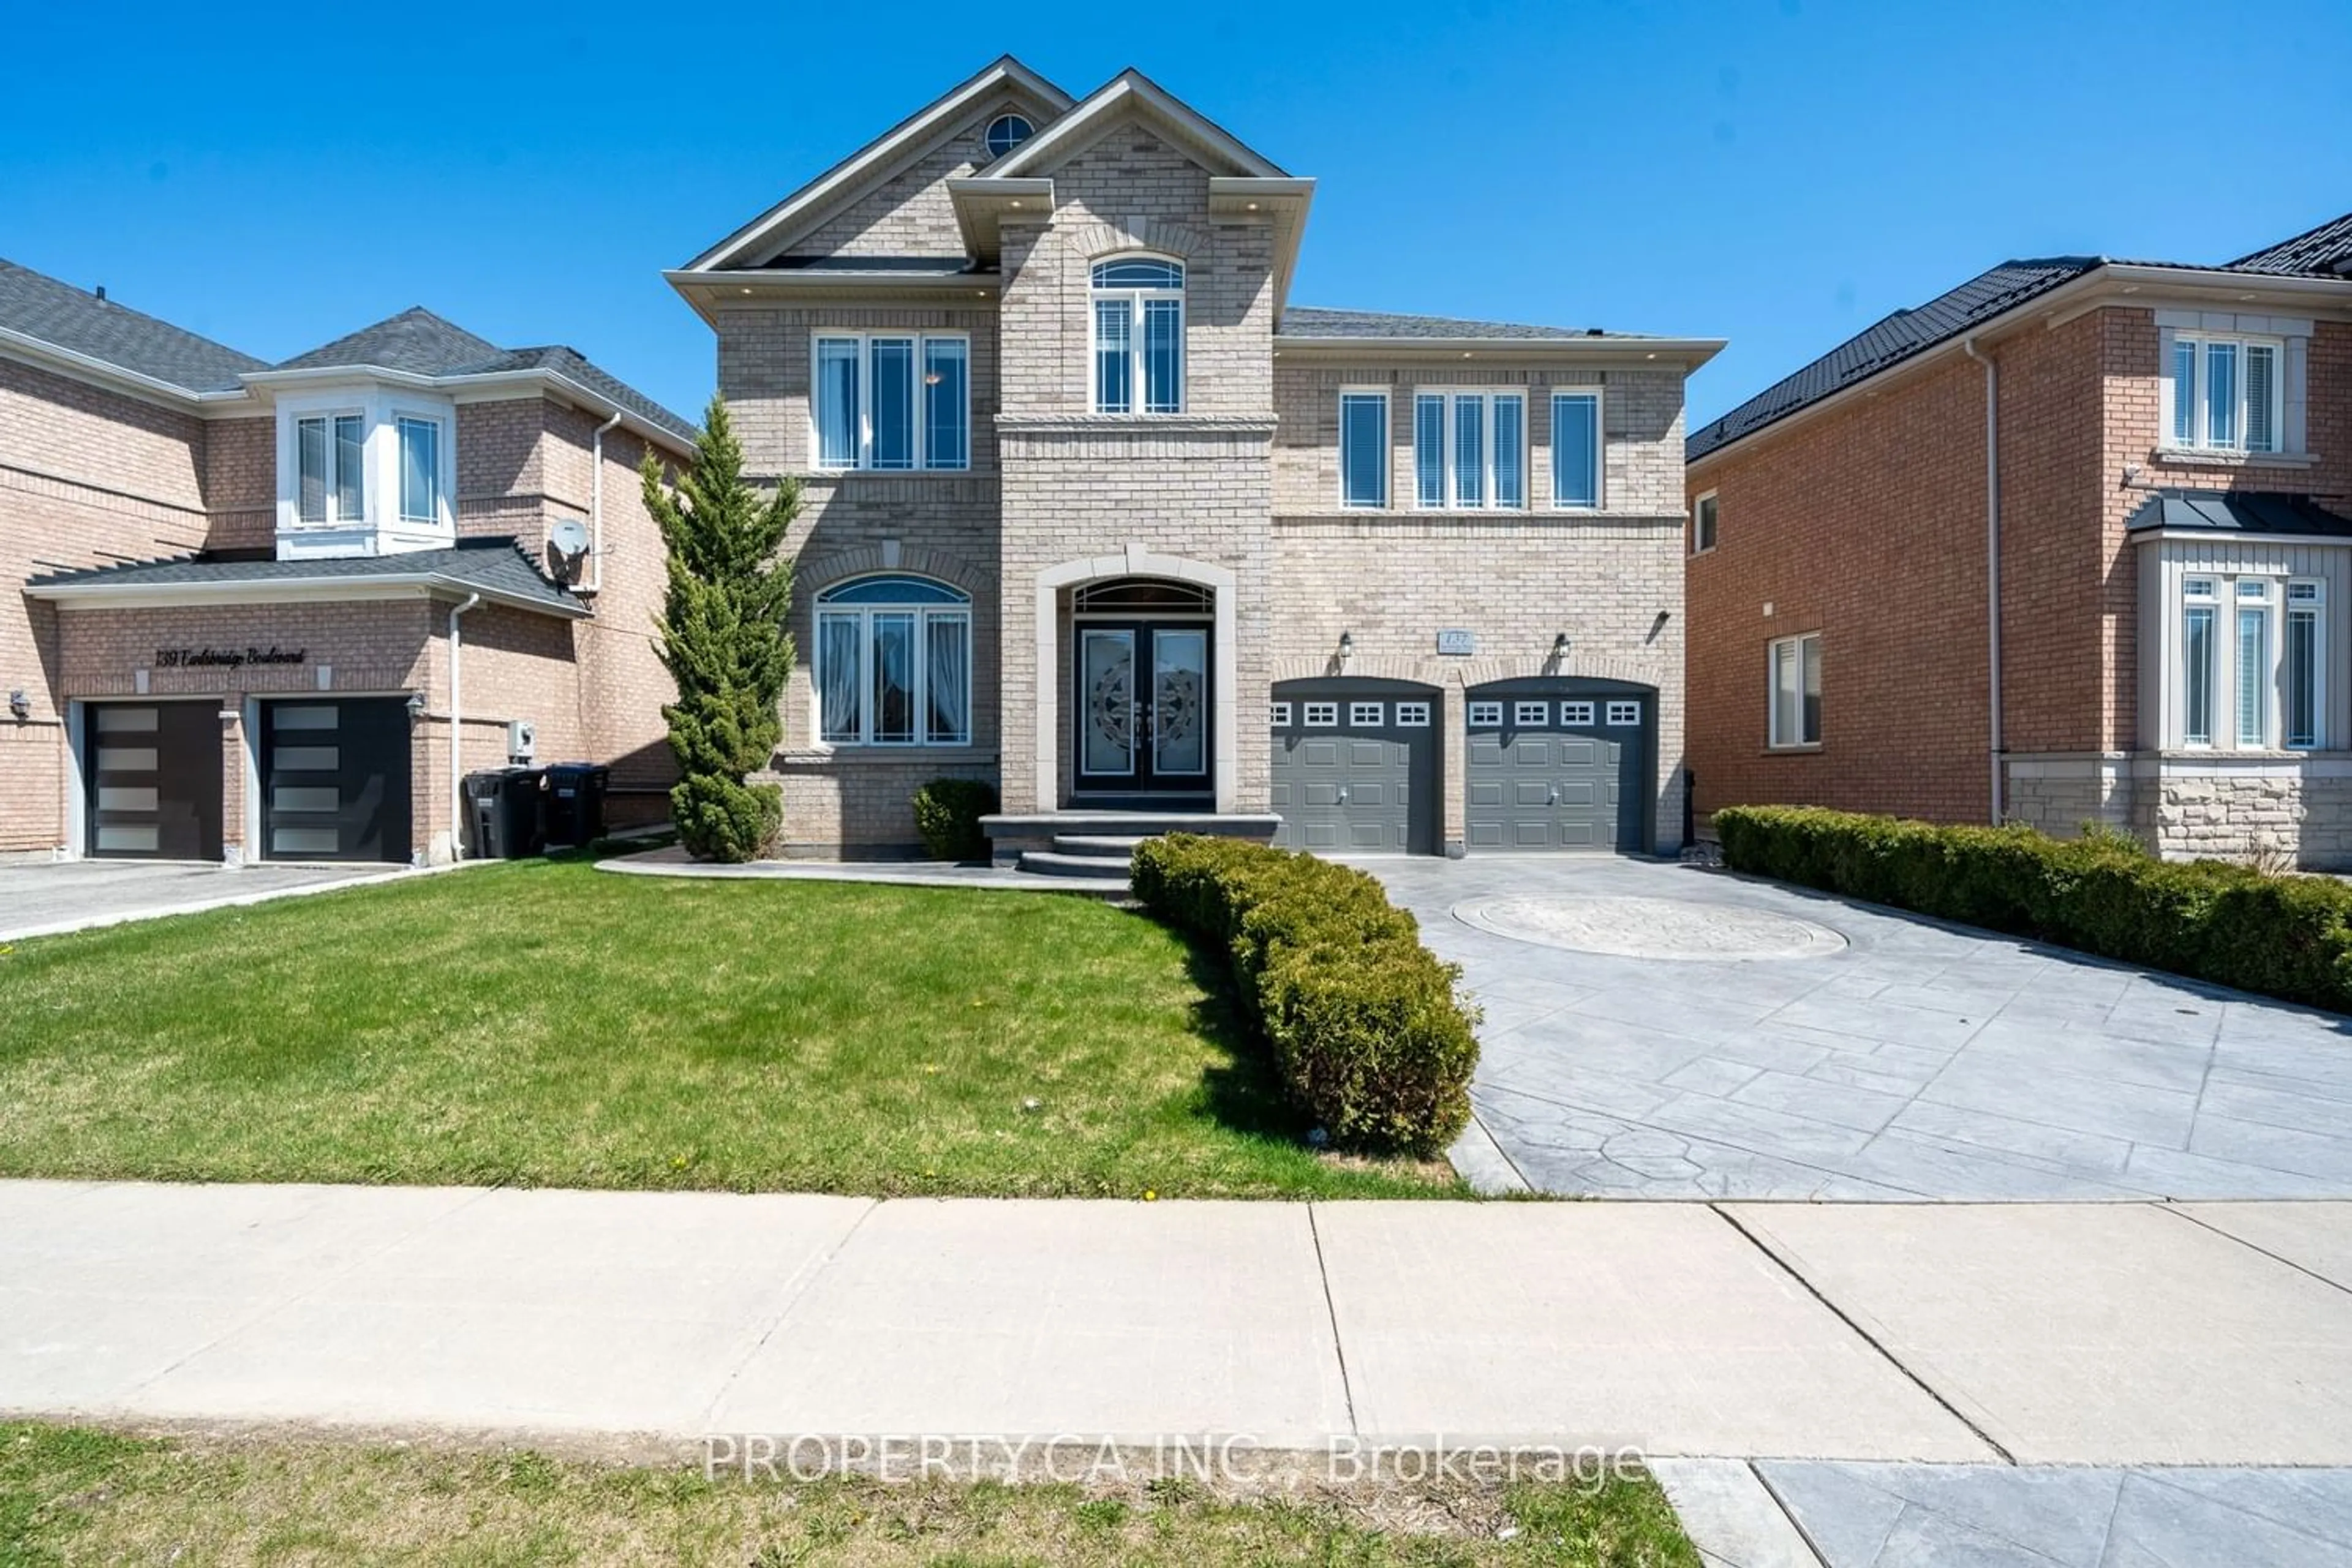 Home with brick exterior material for 137 Earlsbridge Blvd, Brampton Ontario L7A 3T7